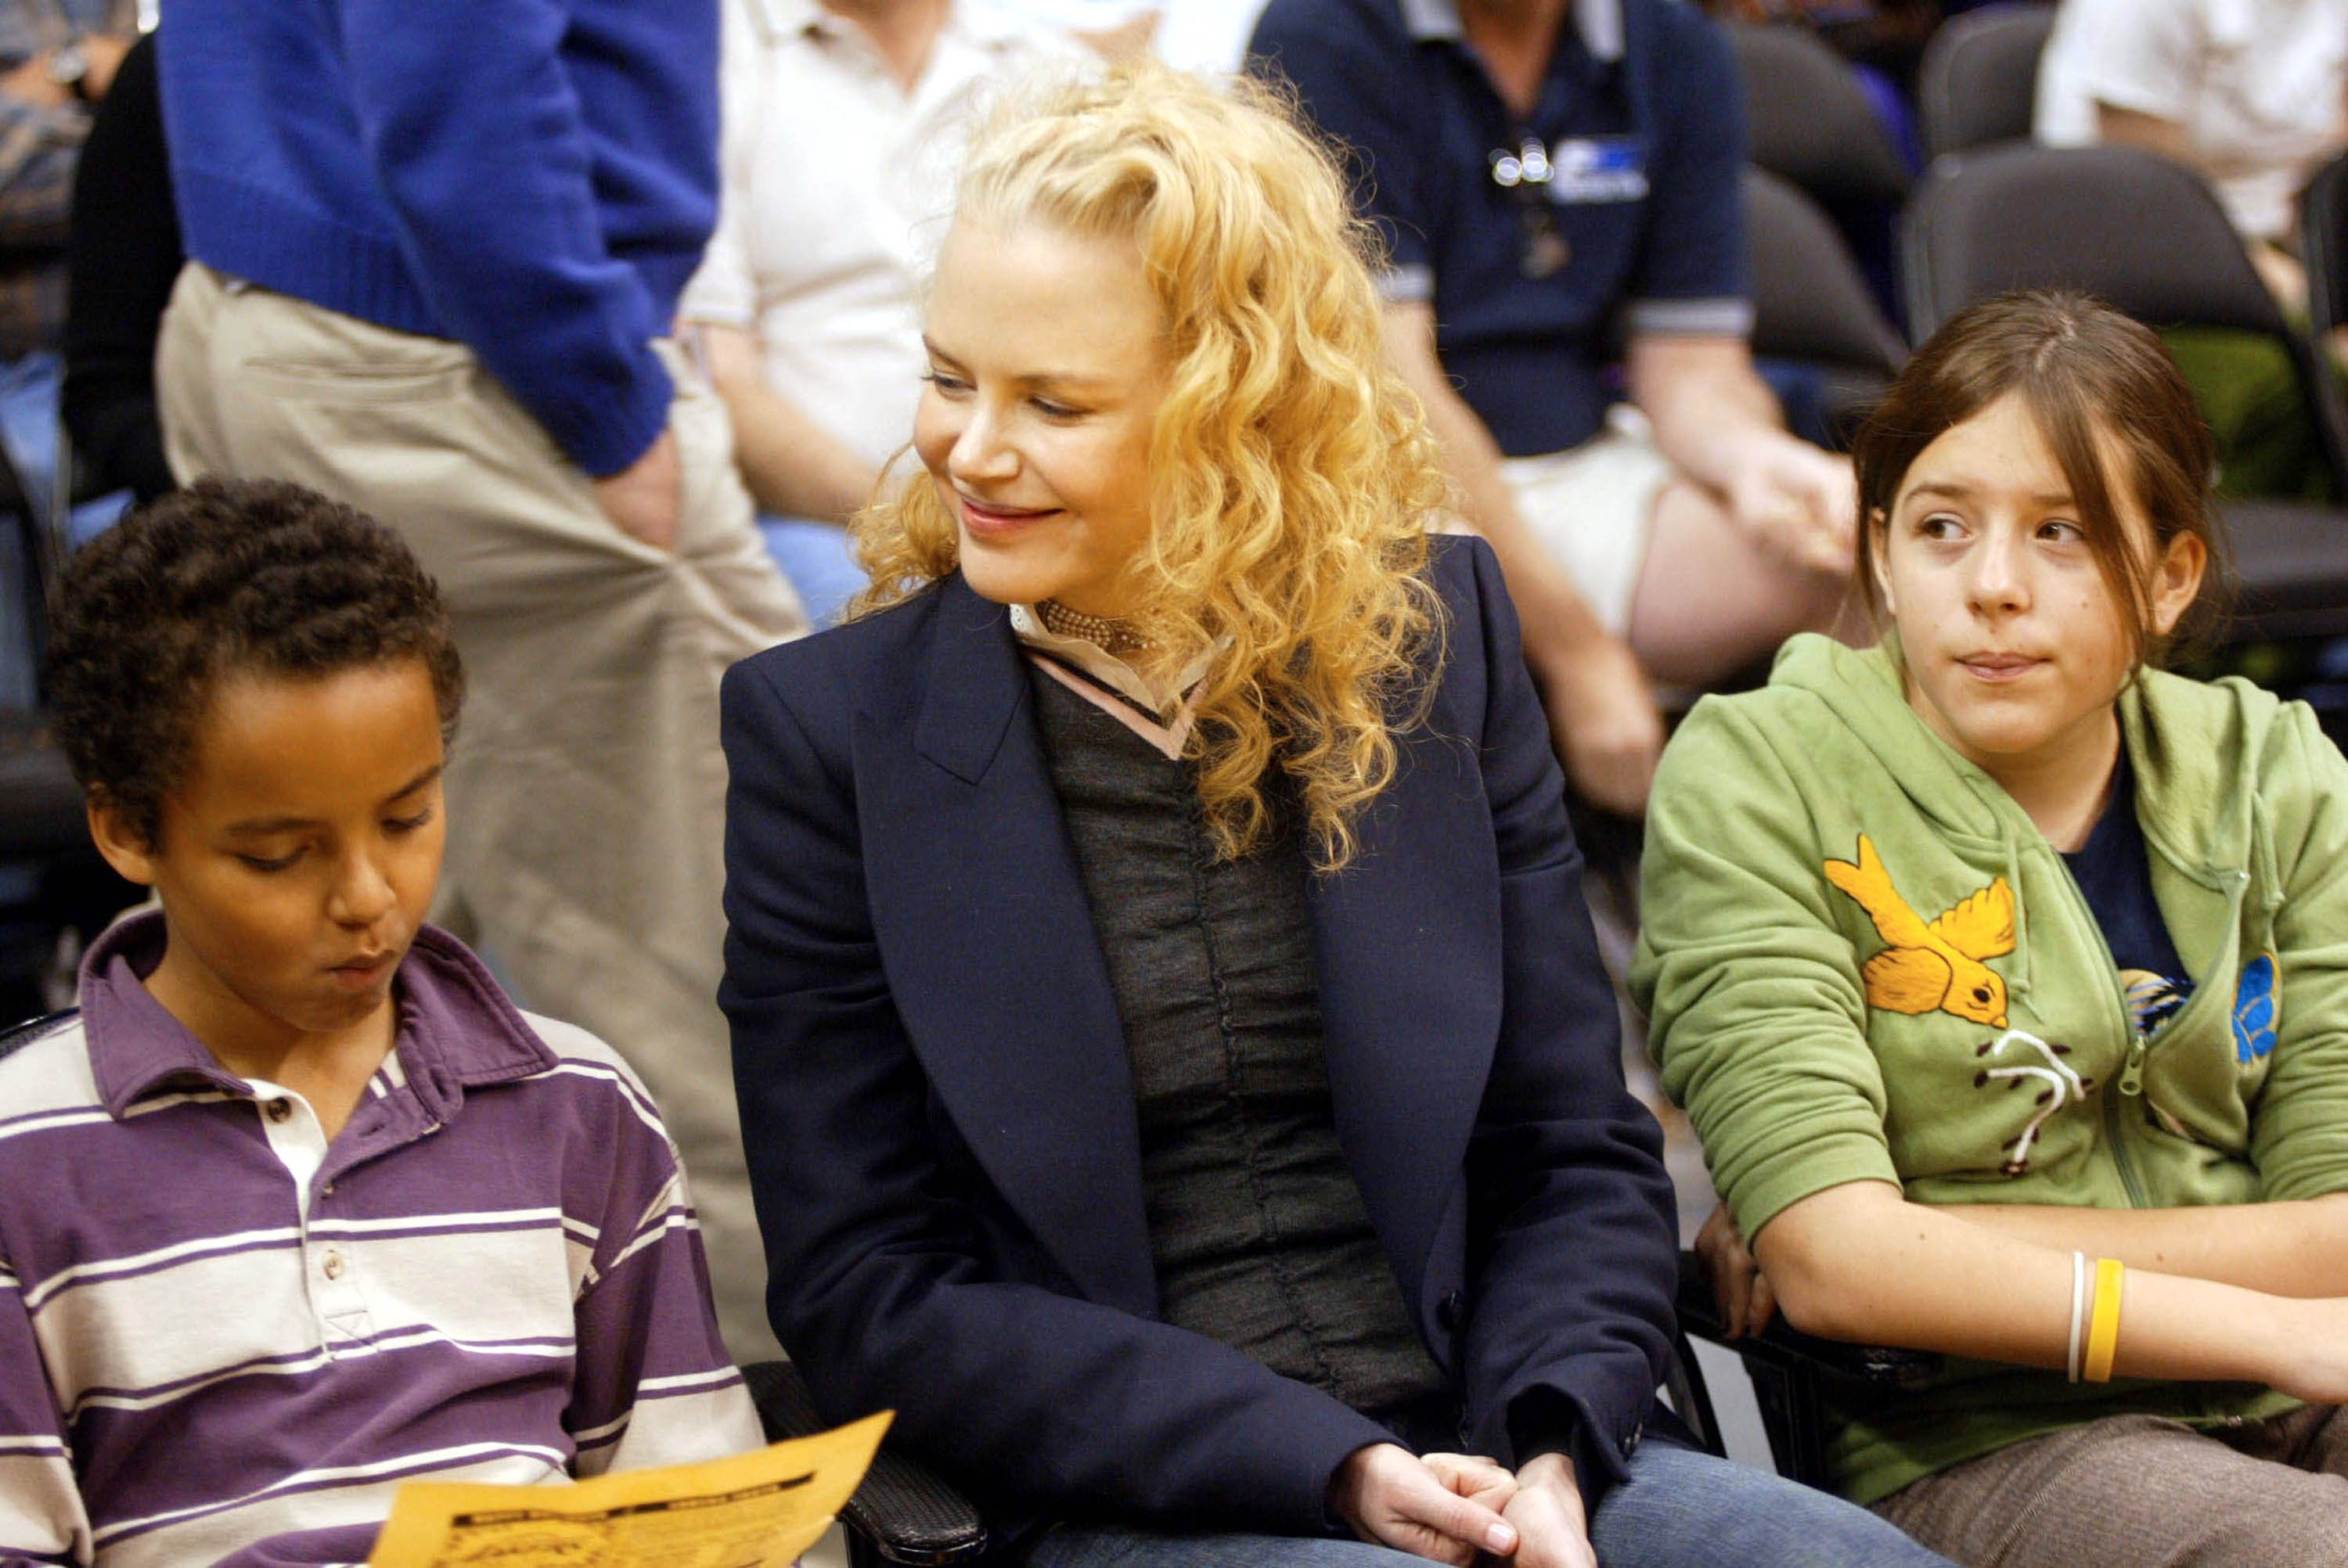 Actress Nicole Kidman and her children Connor (L) and Isabella (R) attend a game between the Los Angeles Lakers and the Miami Heat at the Staples Center December 25, 2004 in Los Angeles, California. | Source: Getty Images